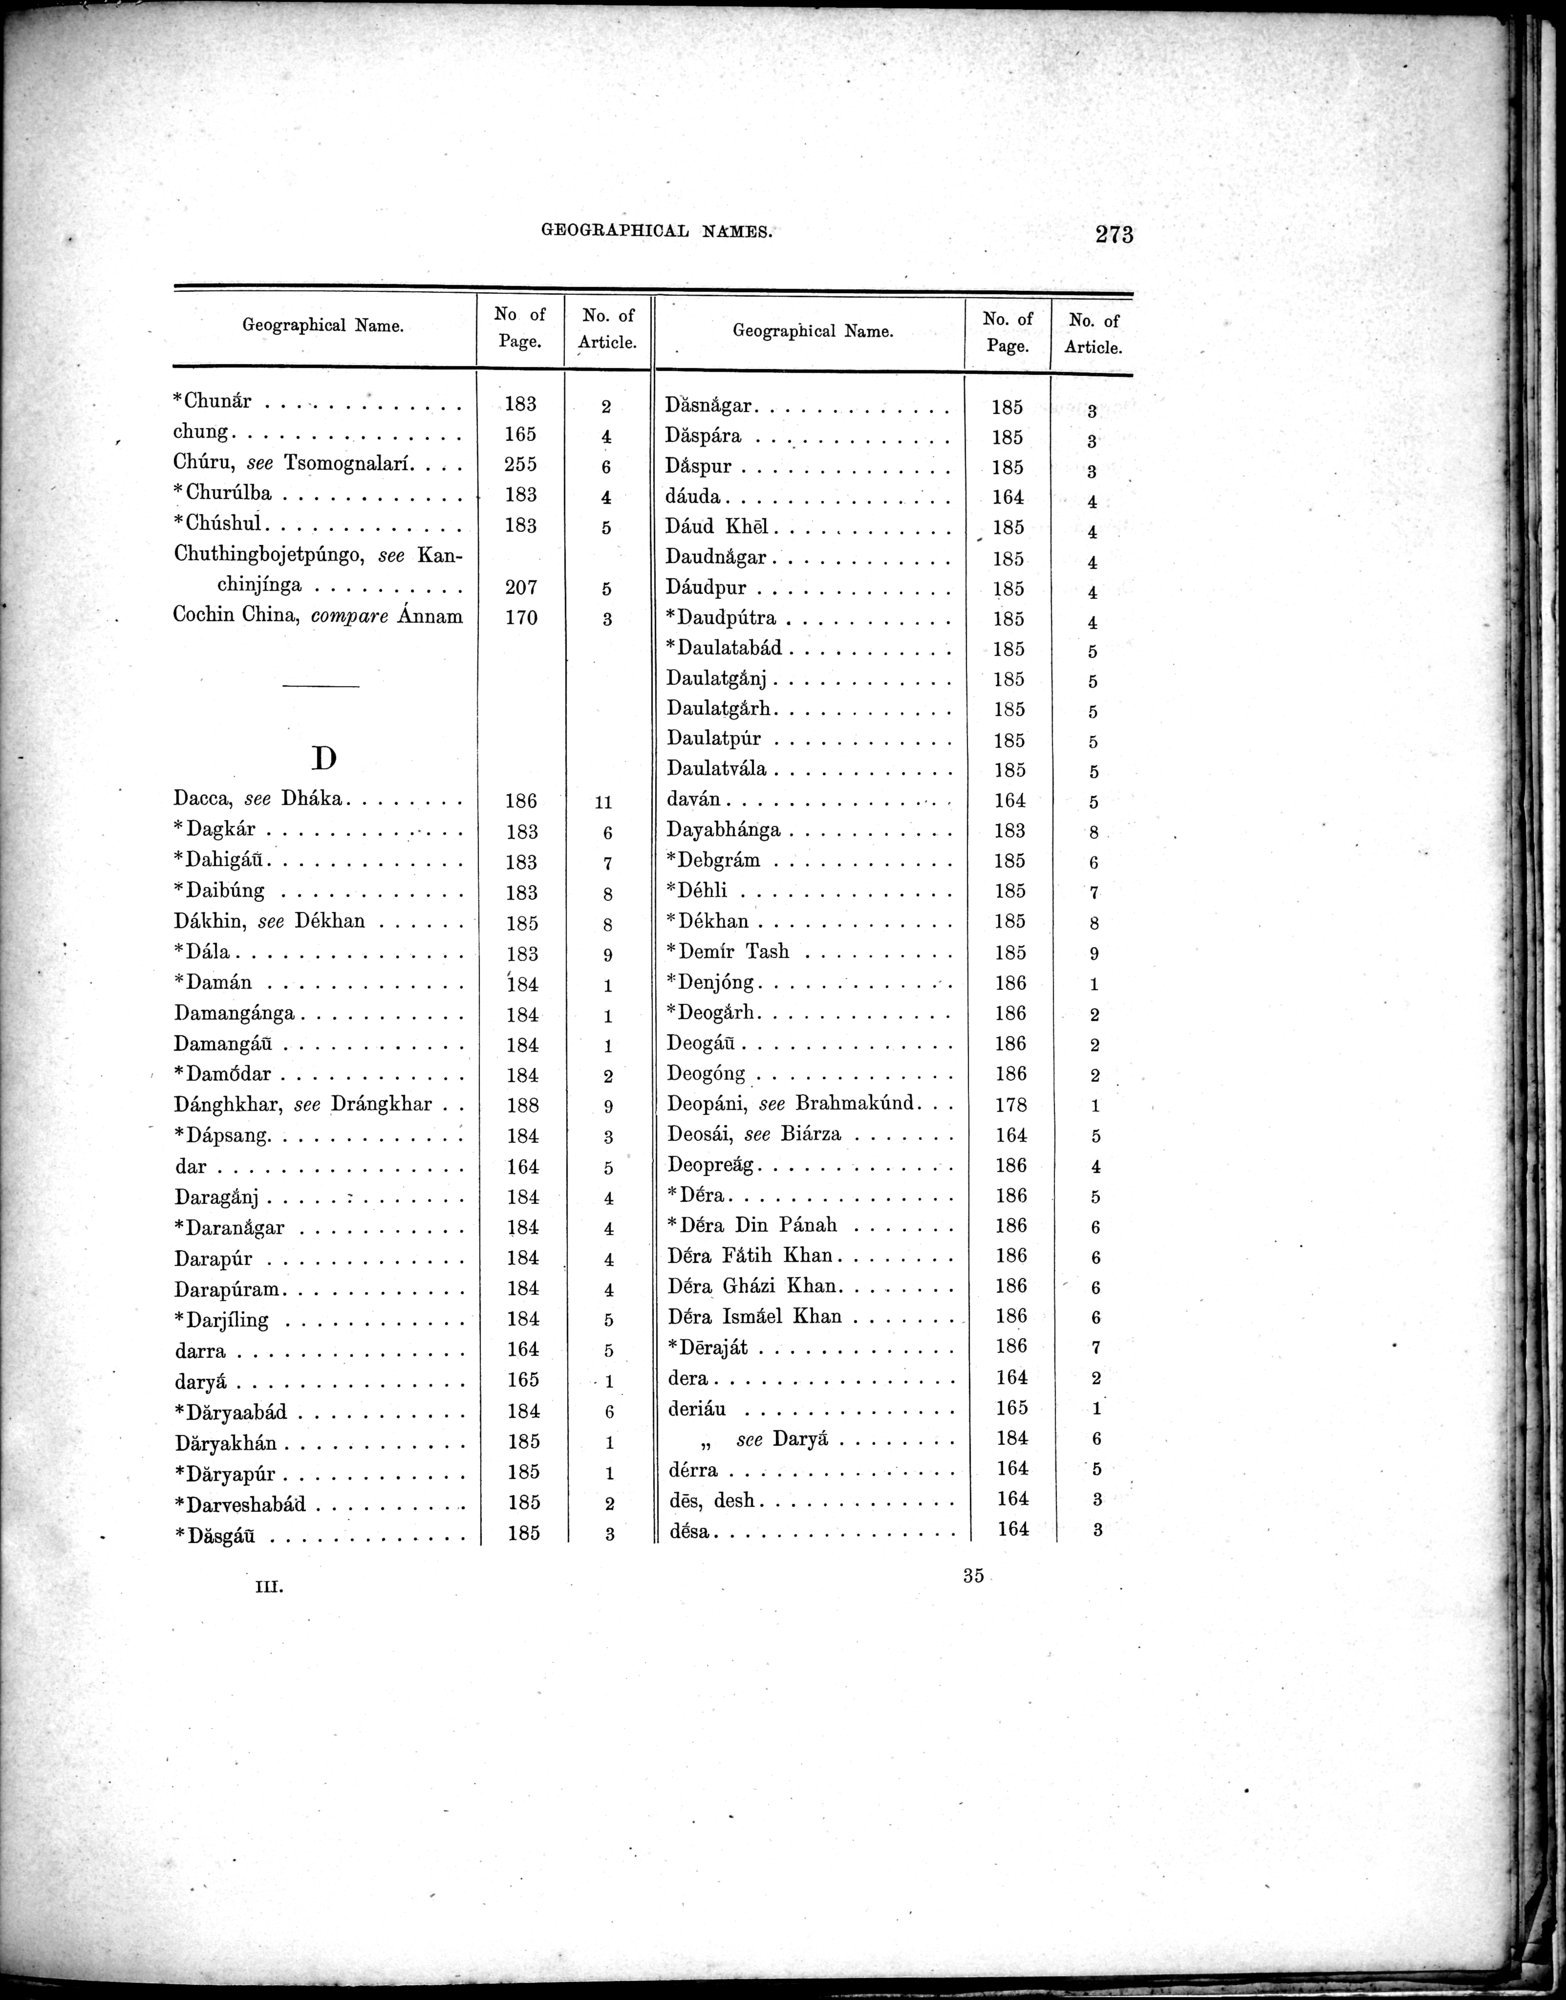 Results of a Scientific Mission to India and High Asia : vol.3 / Page 305 (Grayscale High Resolution Image)